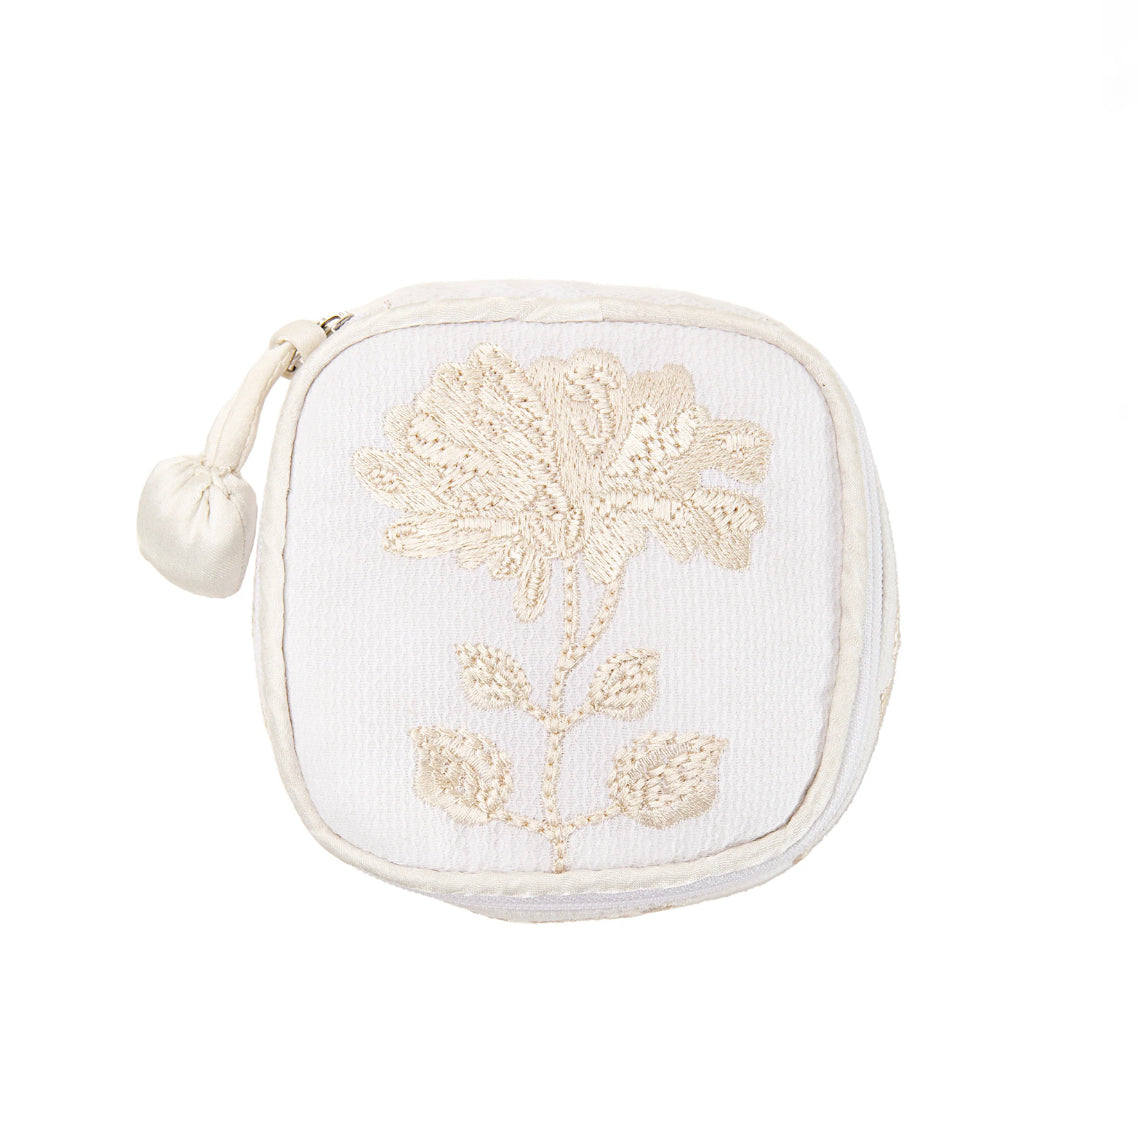 Embroidered Pique Jewelry Box with Ivory Satin Trim